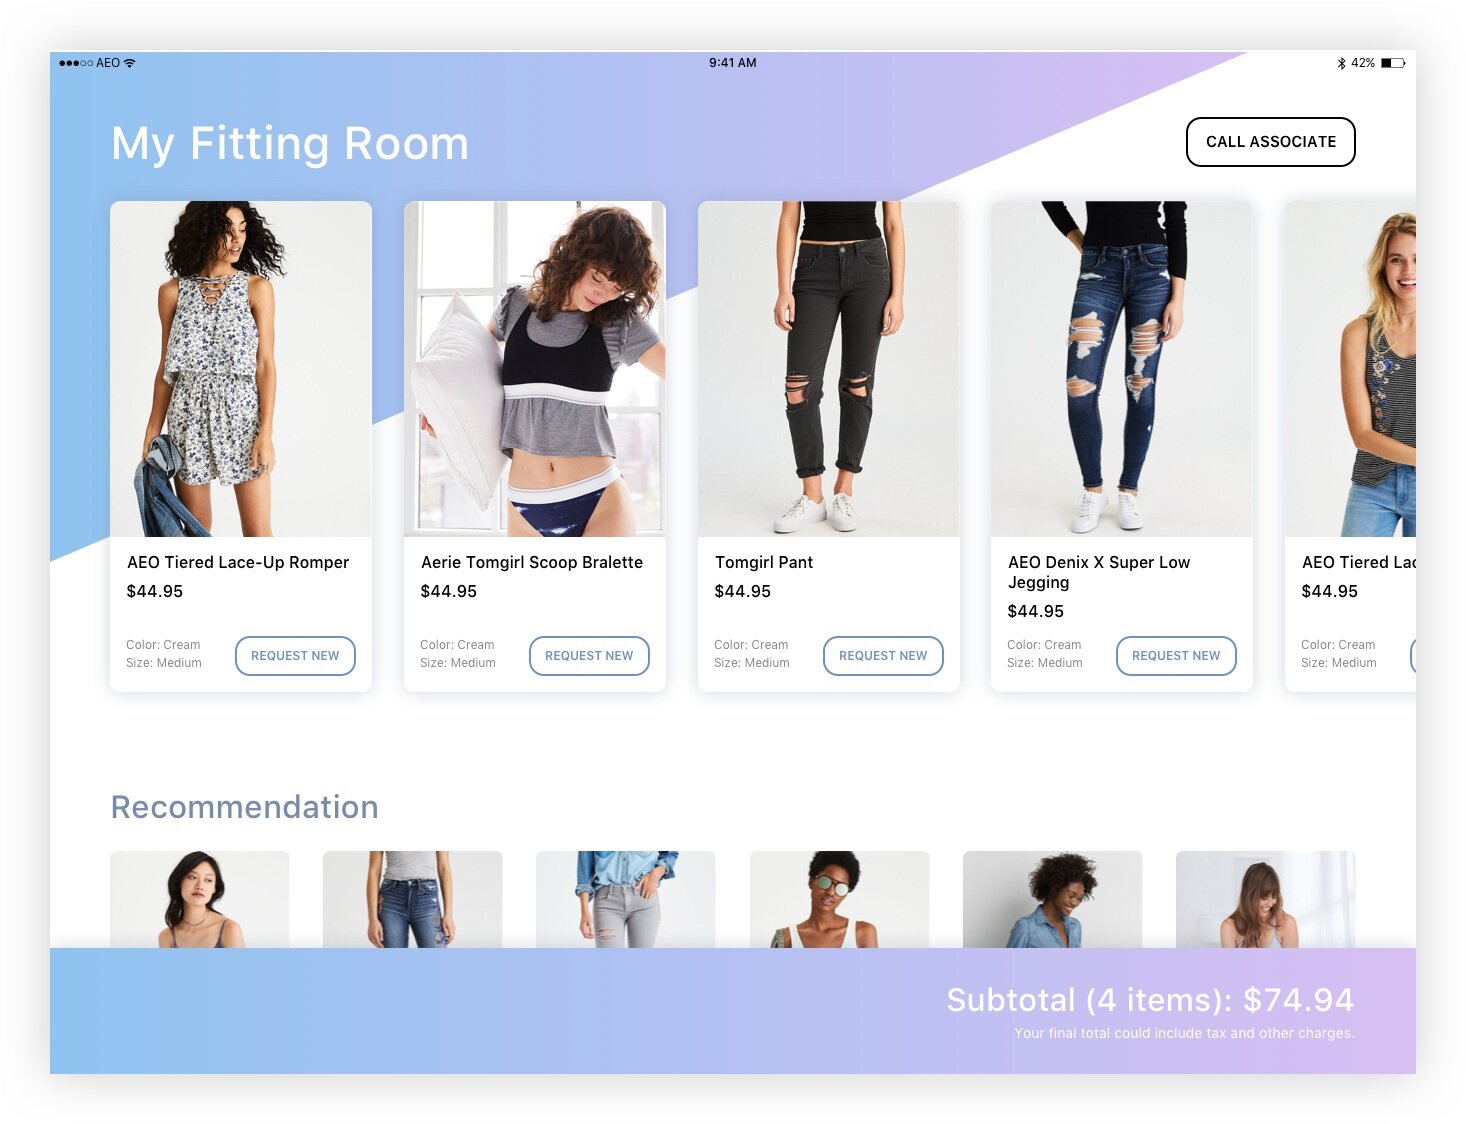  Similar to the initial wireframe, focus on try-on products but added some visual pop to make the experience feel more modern. Vertical scroll to see recommendations. 